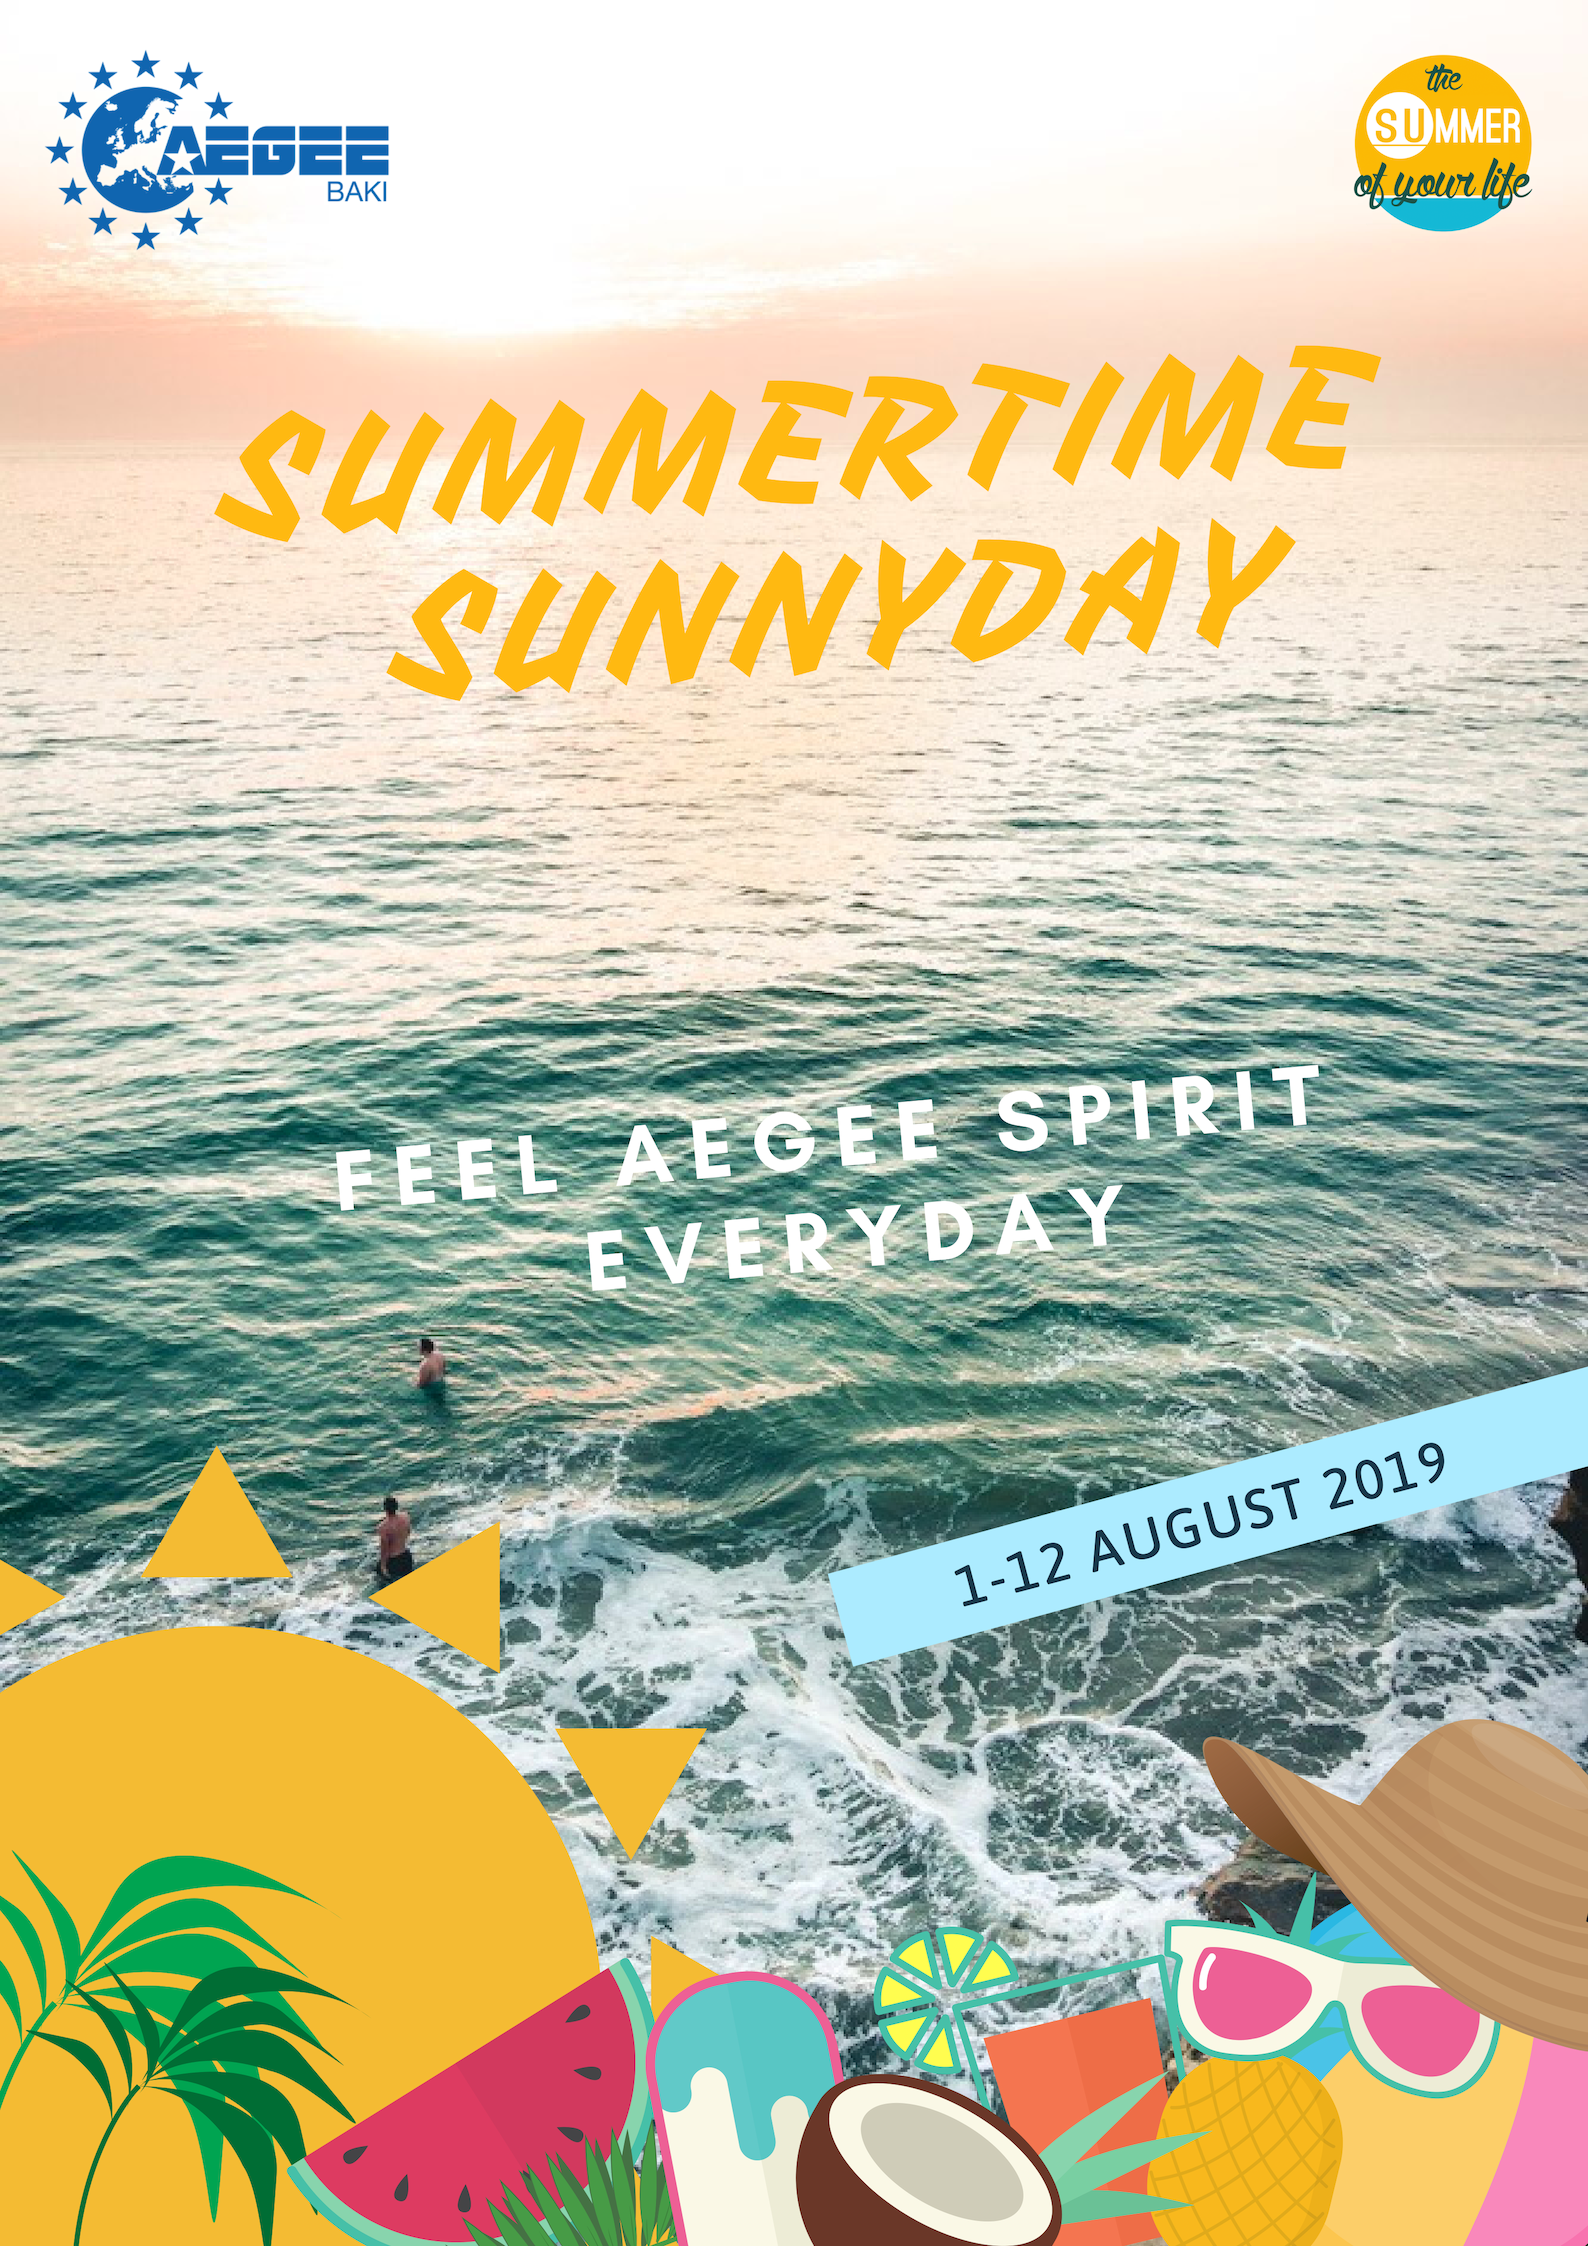 SUmmertime SUnnyday-Feel AEGEE spirit EVERYDAY Profile Picture